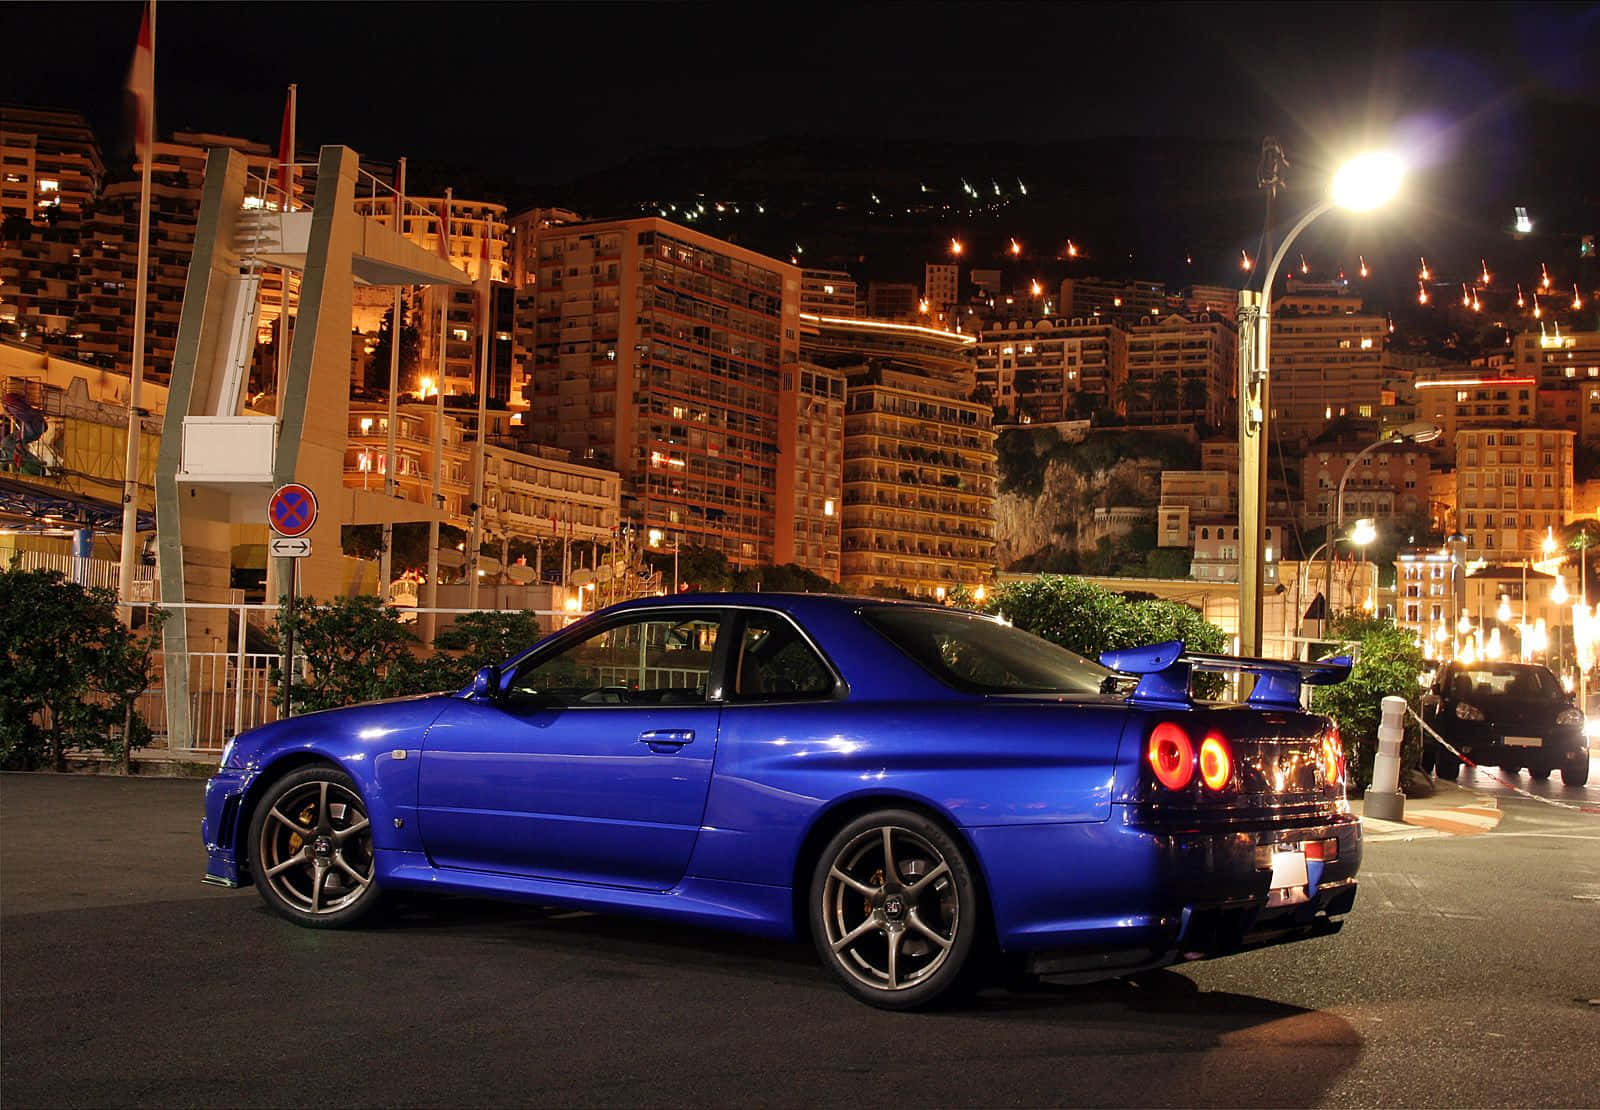 Zoom Off The Streets With The Cool Gtr!